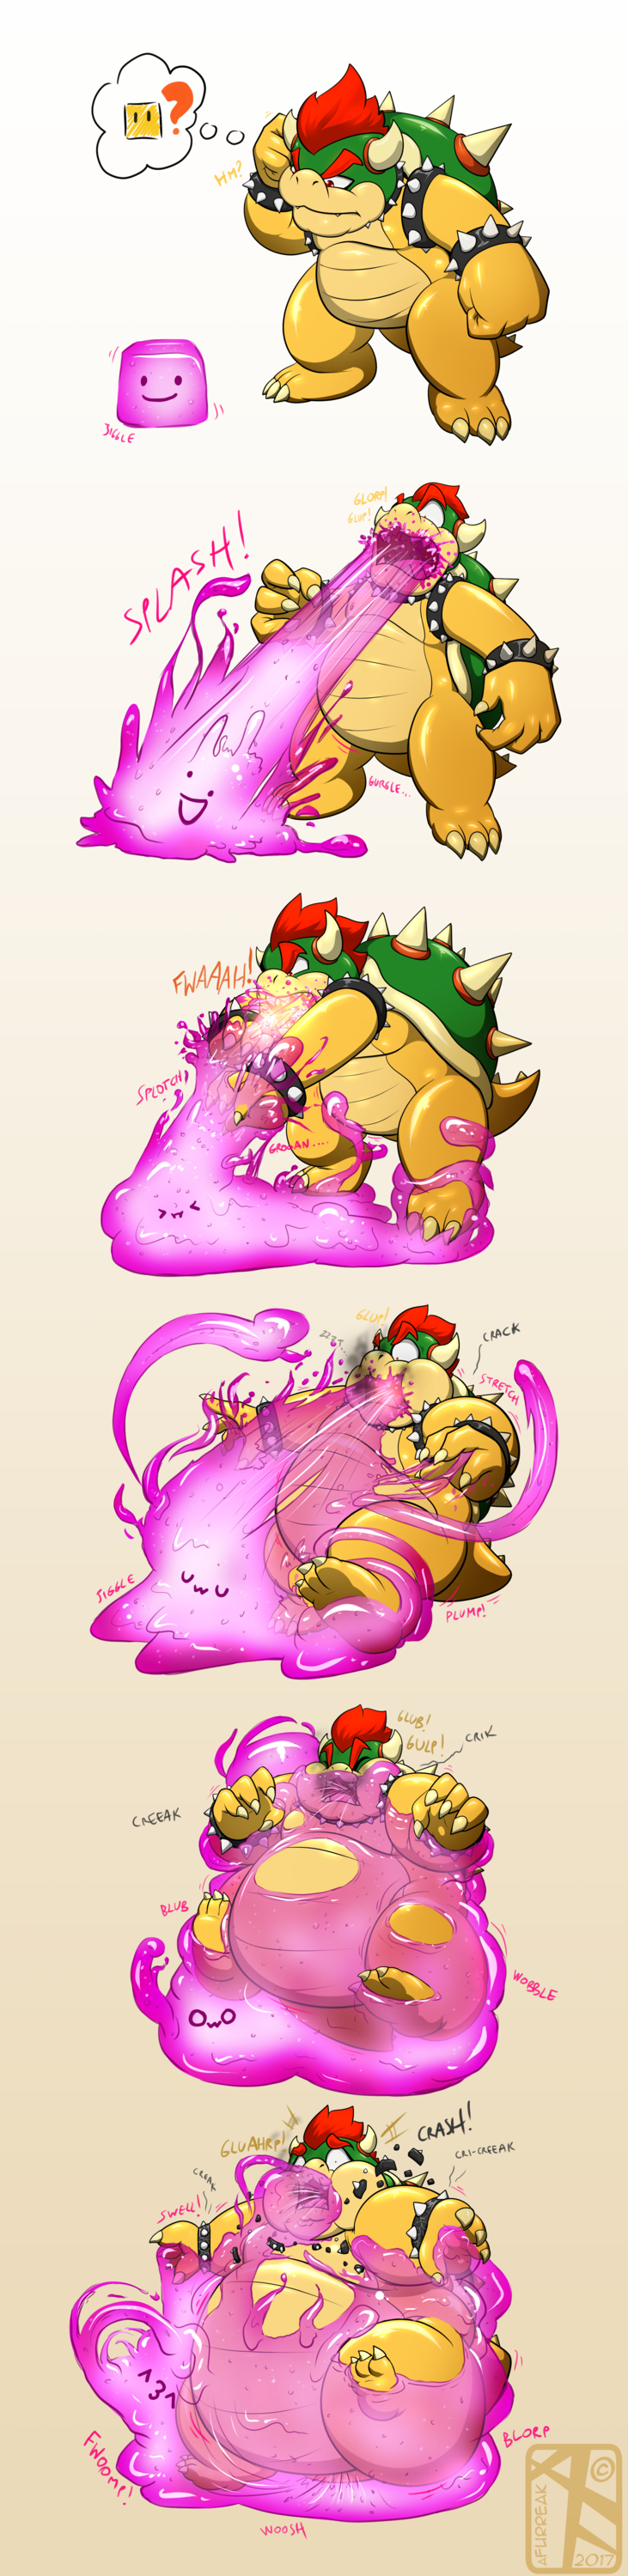 Bowser vs Ditto! [Part 1/2]